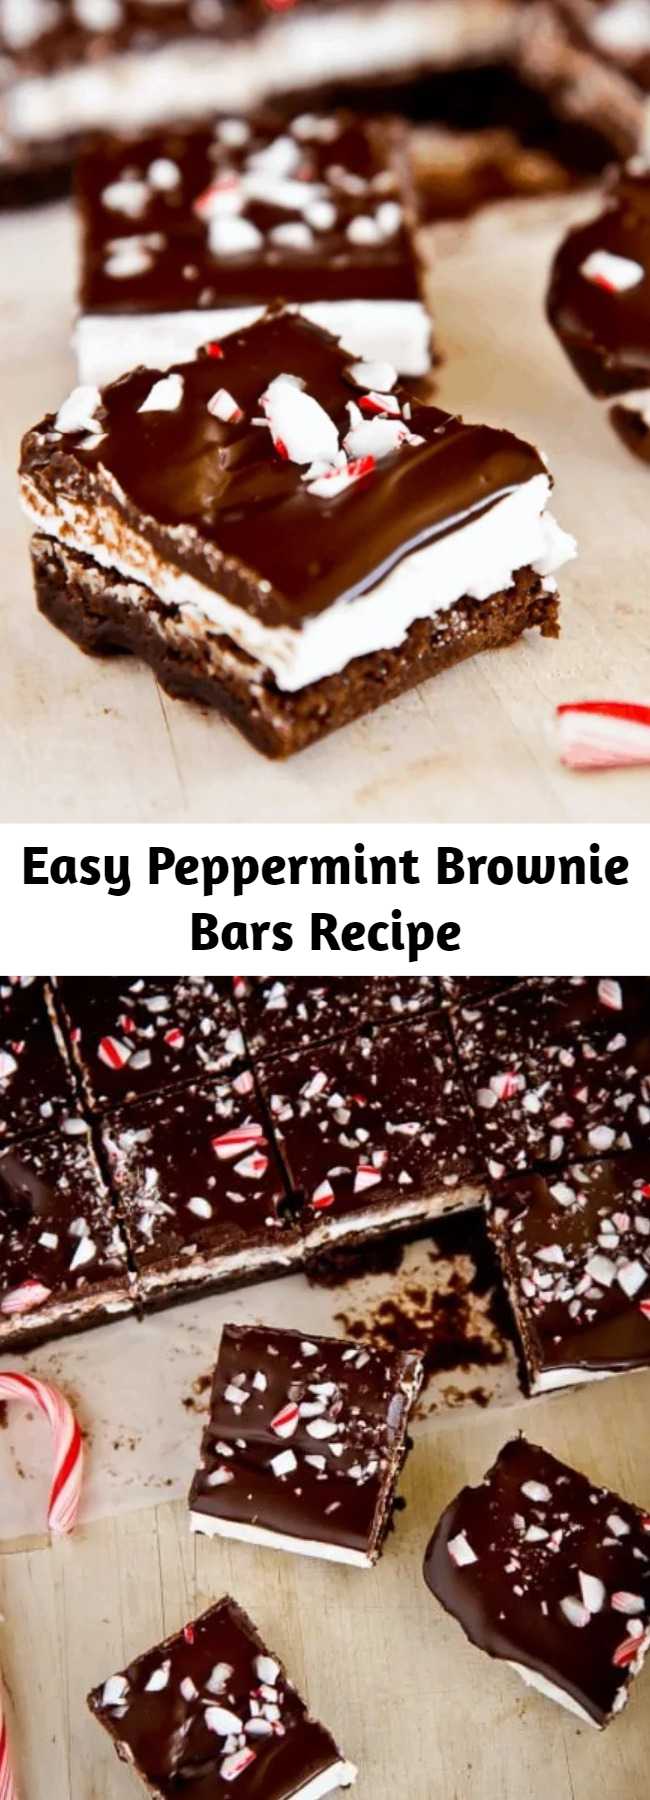 Easy Peppermint Brownie Bars Recipe - Rich and decadent with layers of flavor, these Chocolate Peppermint Brownie Bars are a fantastic holiday dessert. If you love the combo of rich chocolate and refreshing mint, then these brownies are for you! On a holiday cookie tray with other treats these Peppermint Brownie Bars will pretty much steal the show. They are all kinds of minty amazingness.